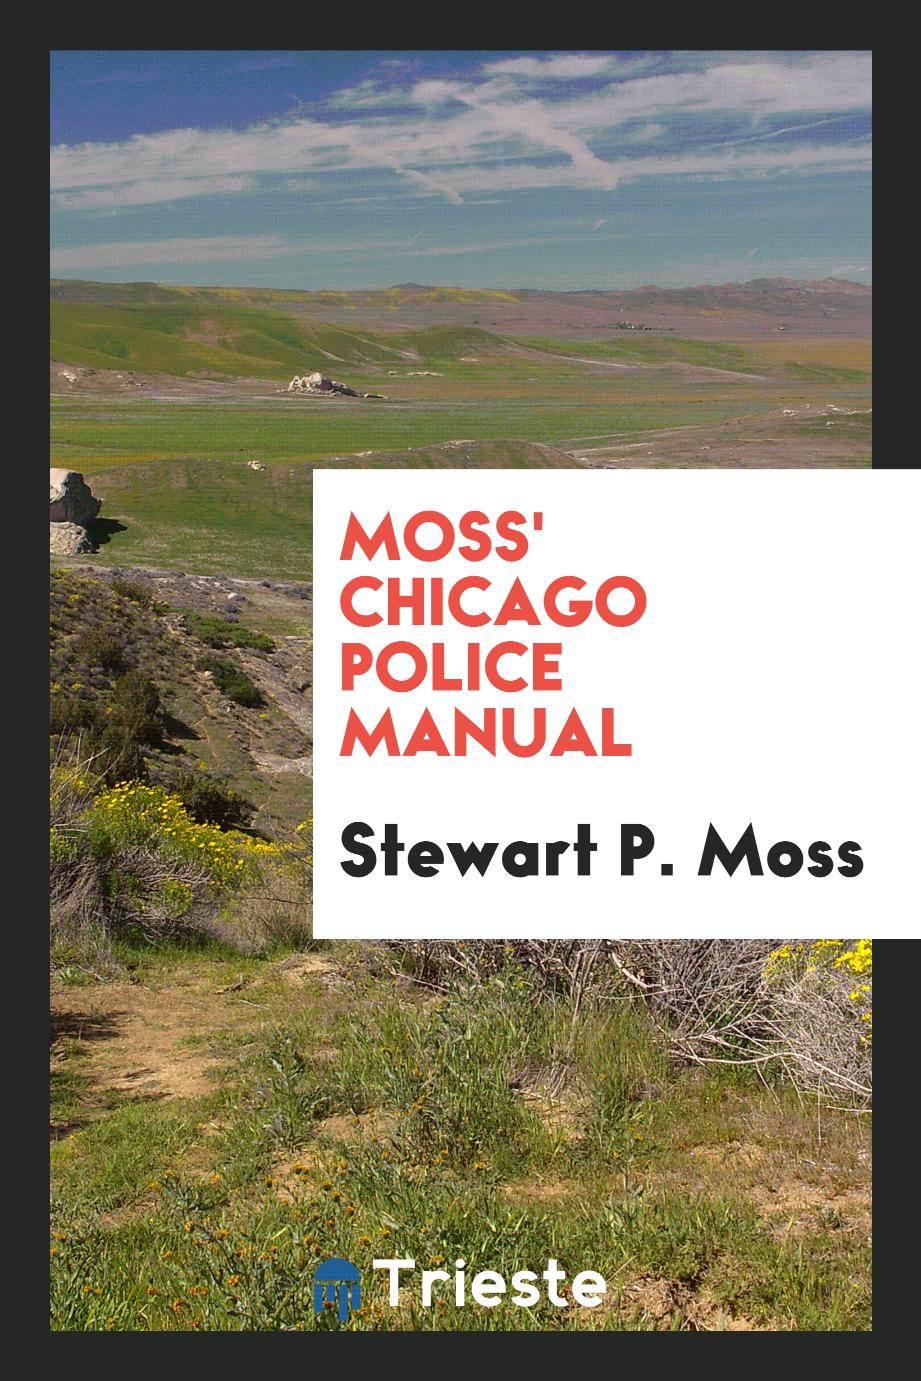 Moss' Chicago police manual